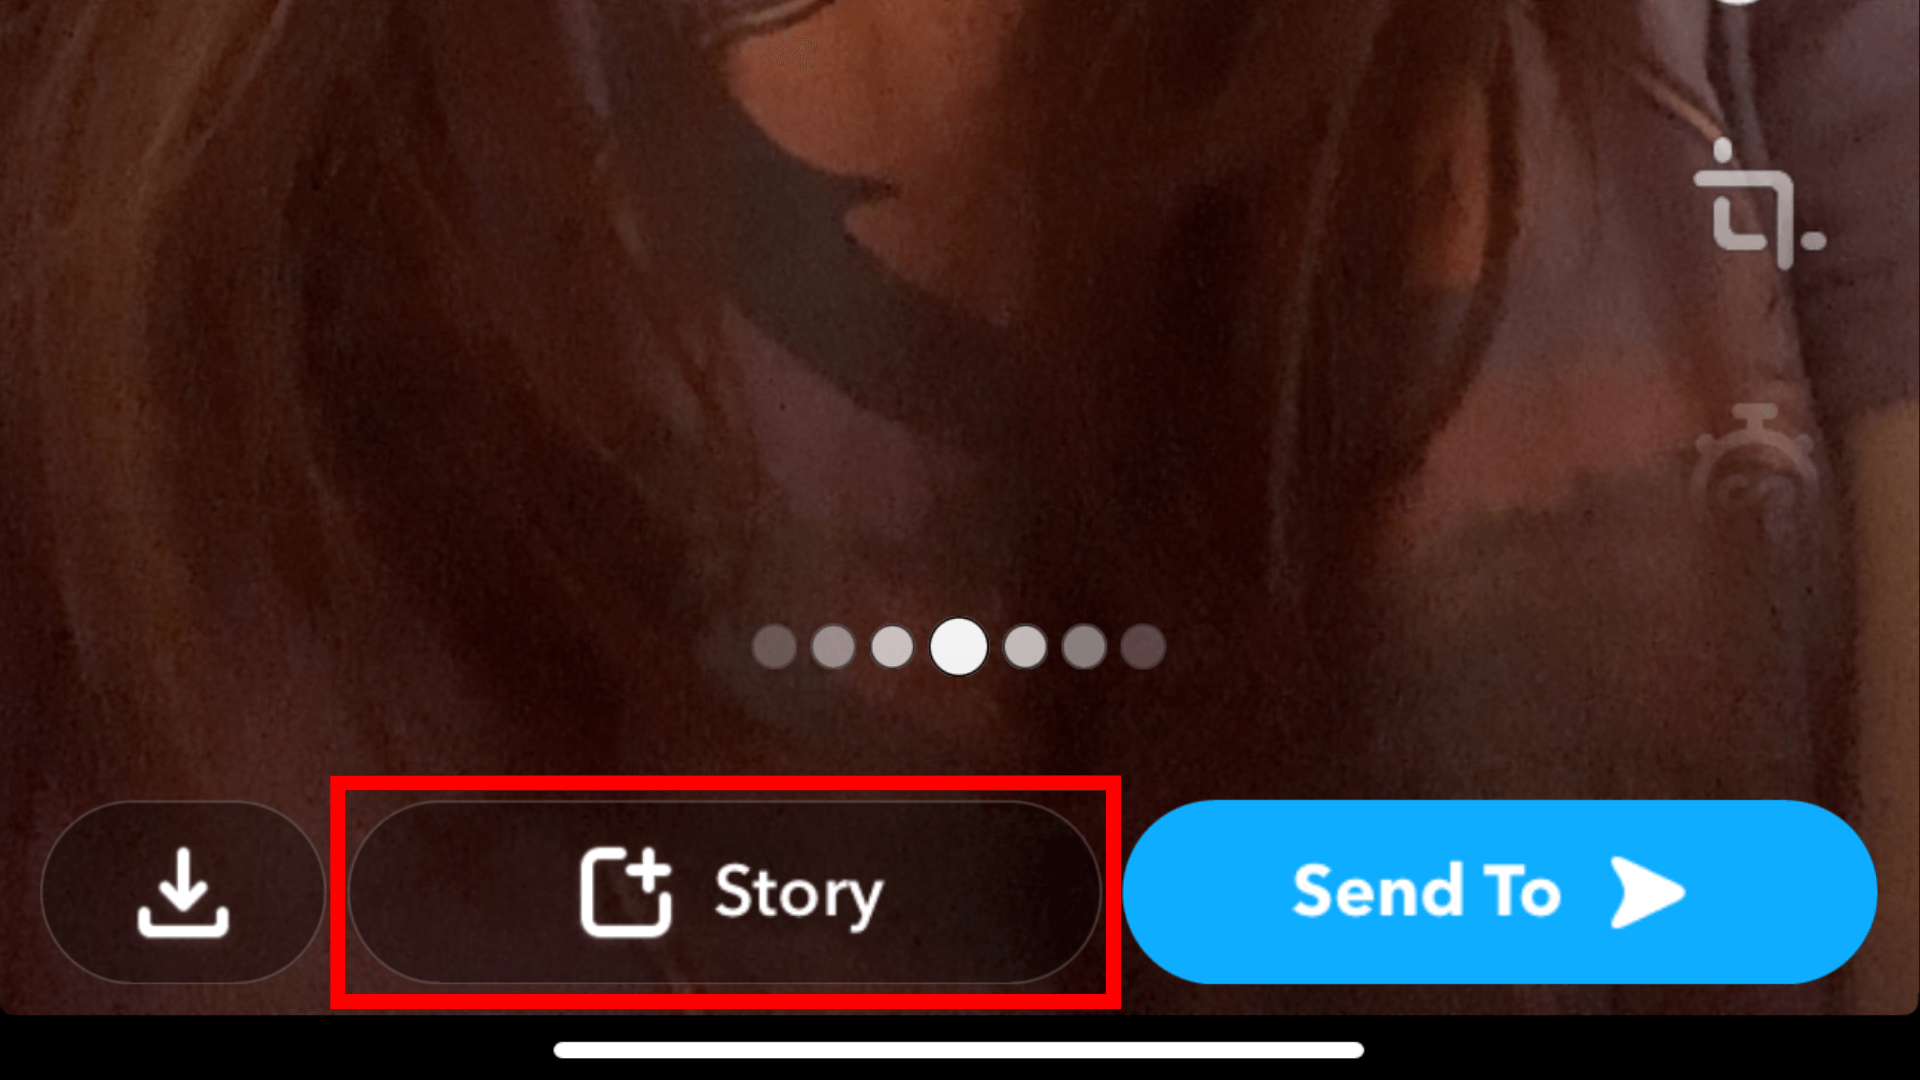 "Add to Story" button in Snapchat.